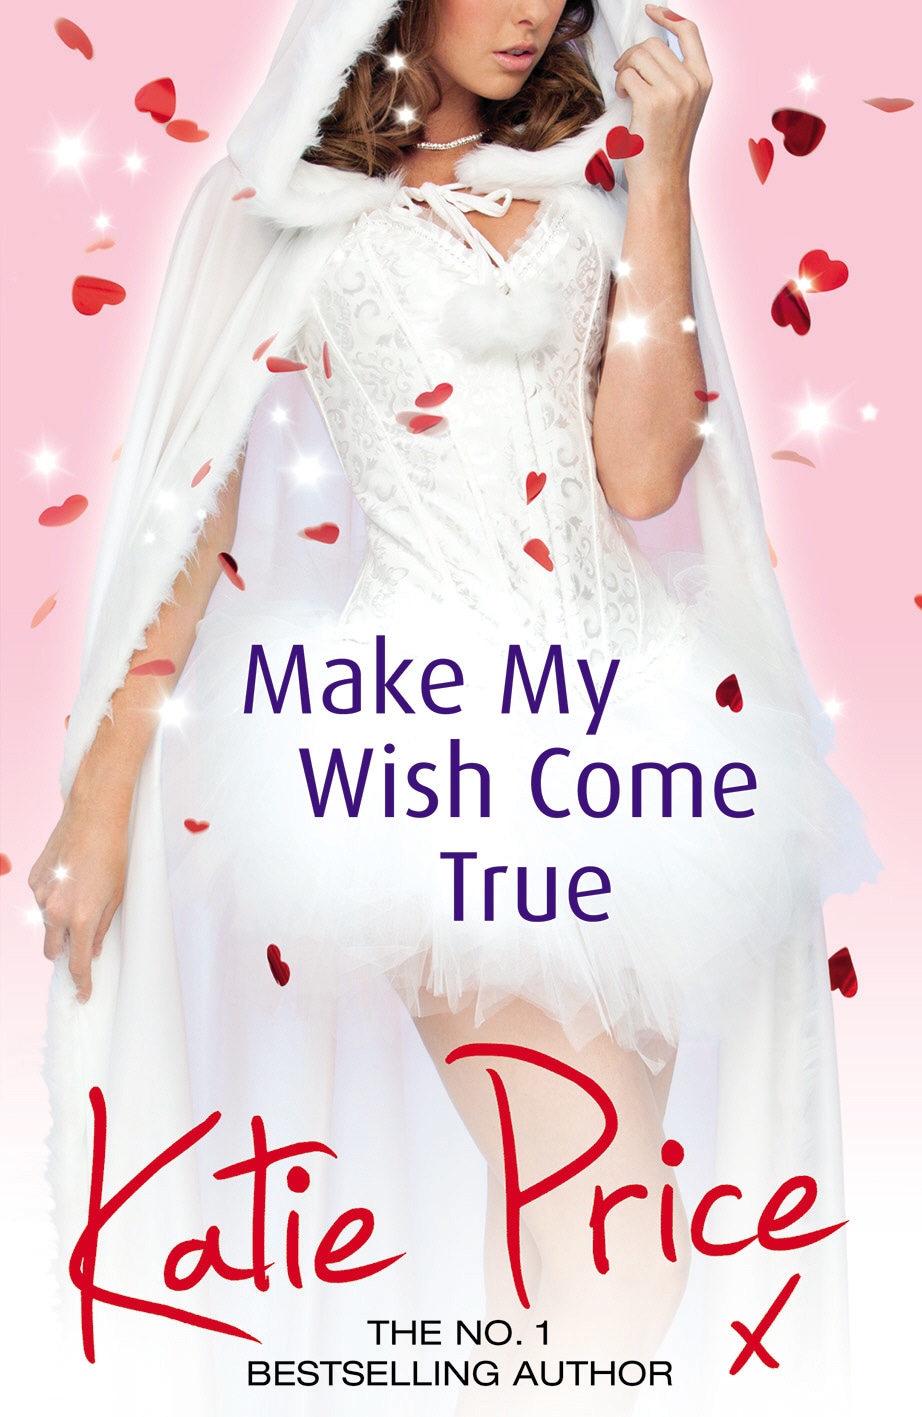 Book “Make My Wish Come True” by Katie Price — July 2, 2015